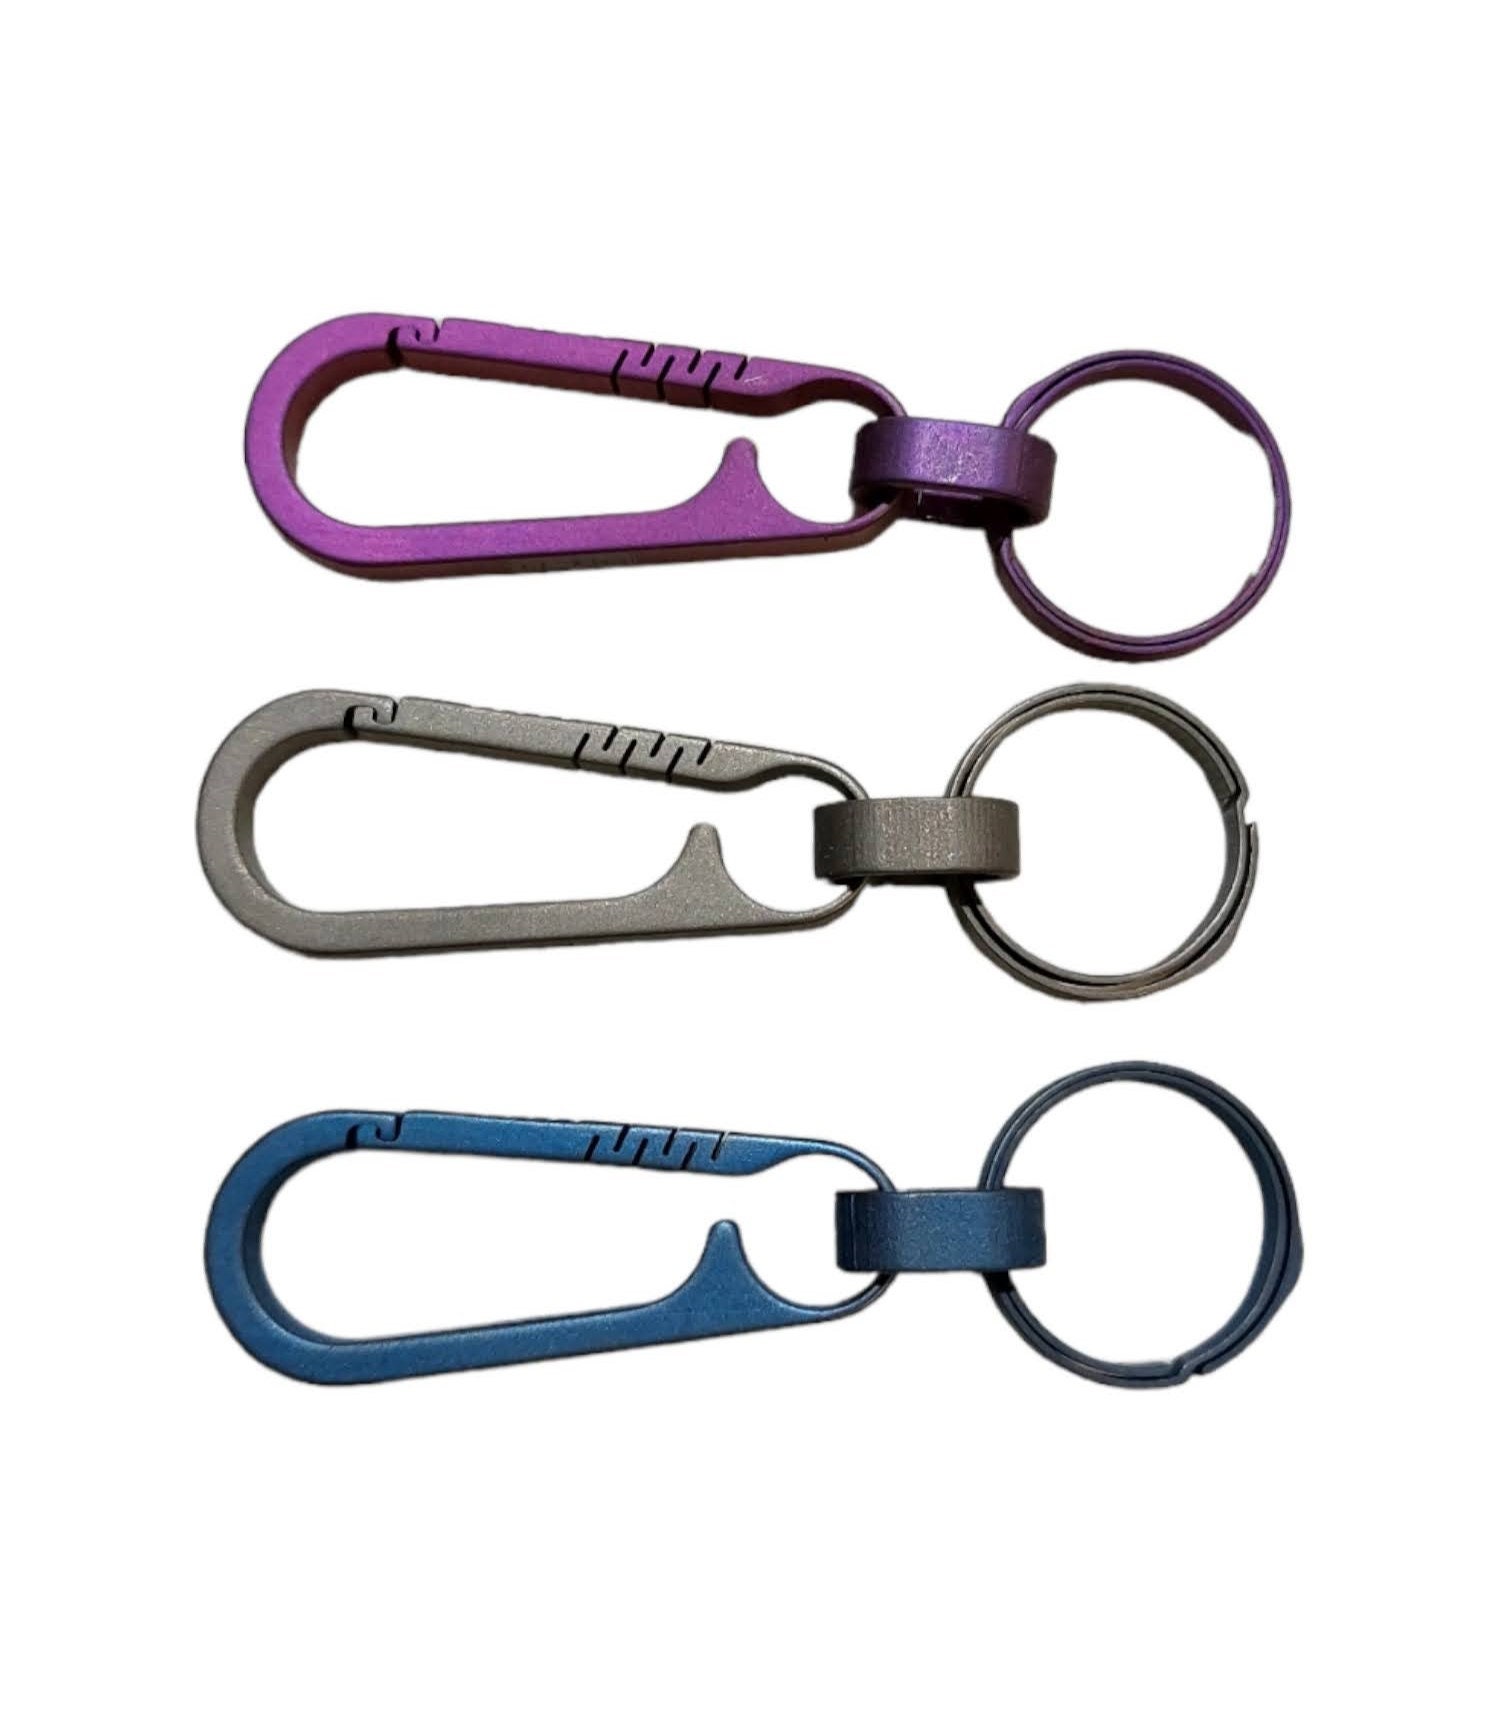 Assorted Colors Tiny Small Steel Pearl Screw Locking Carabiner Keychains  Clasp Safety Hook Keychain Keyring EDC Gear DIY Making Supplies 